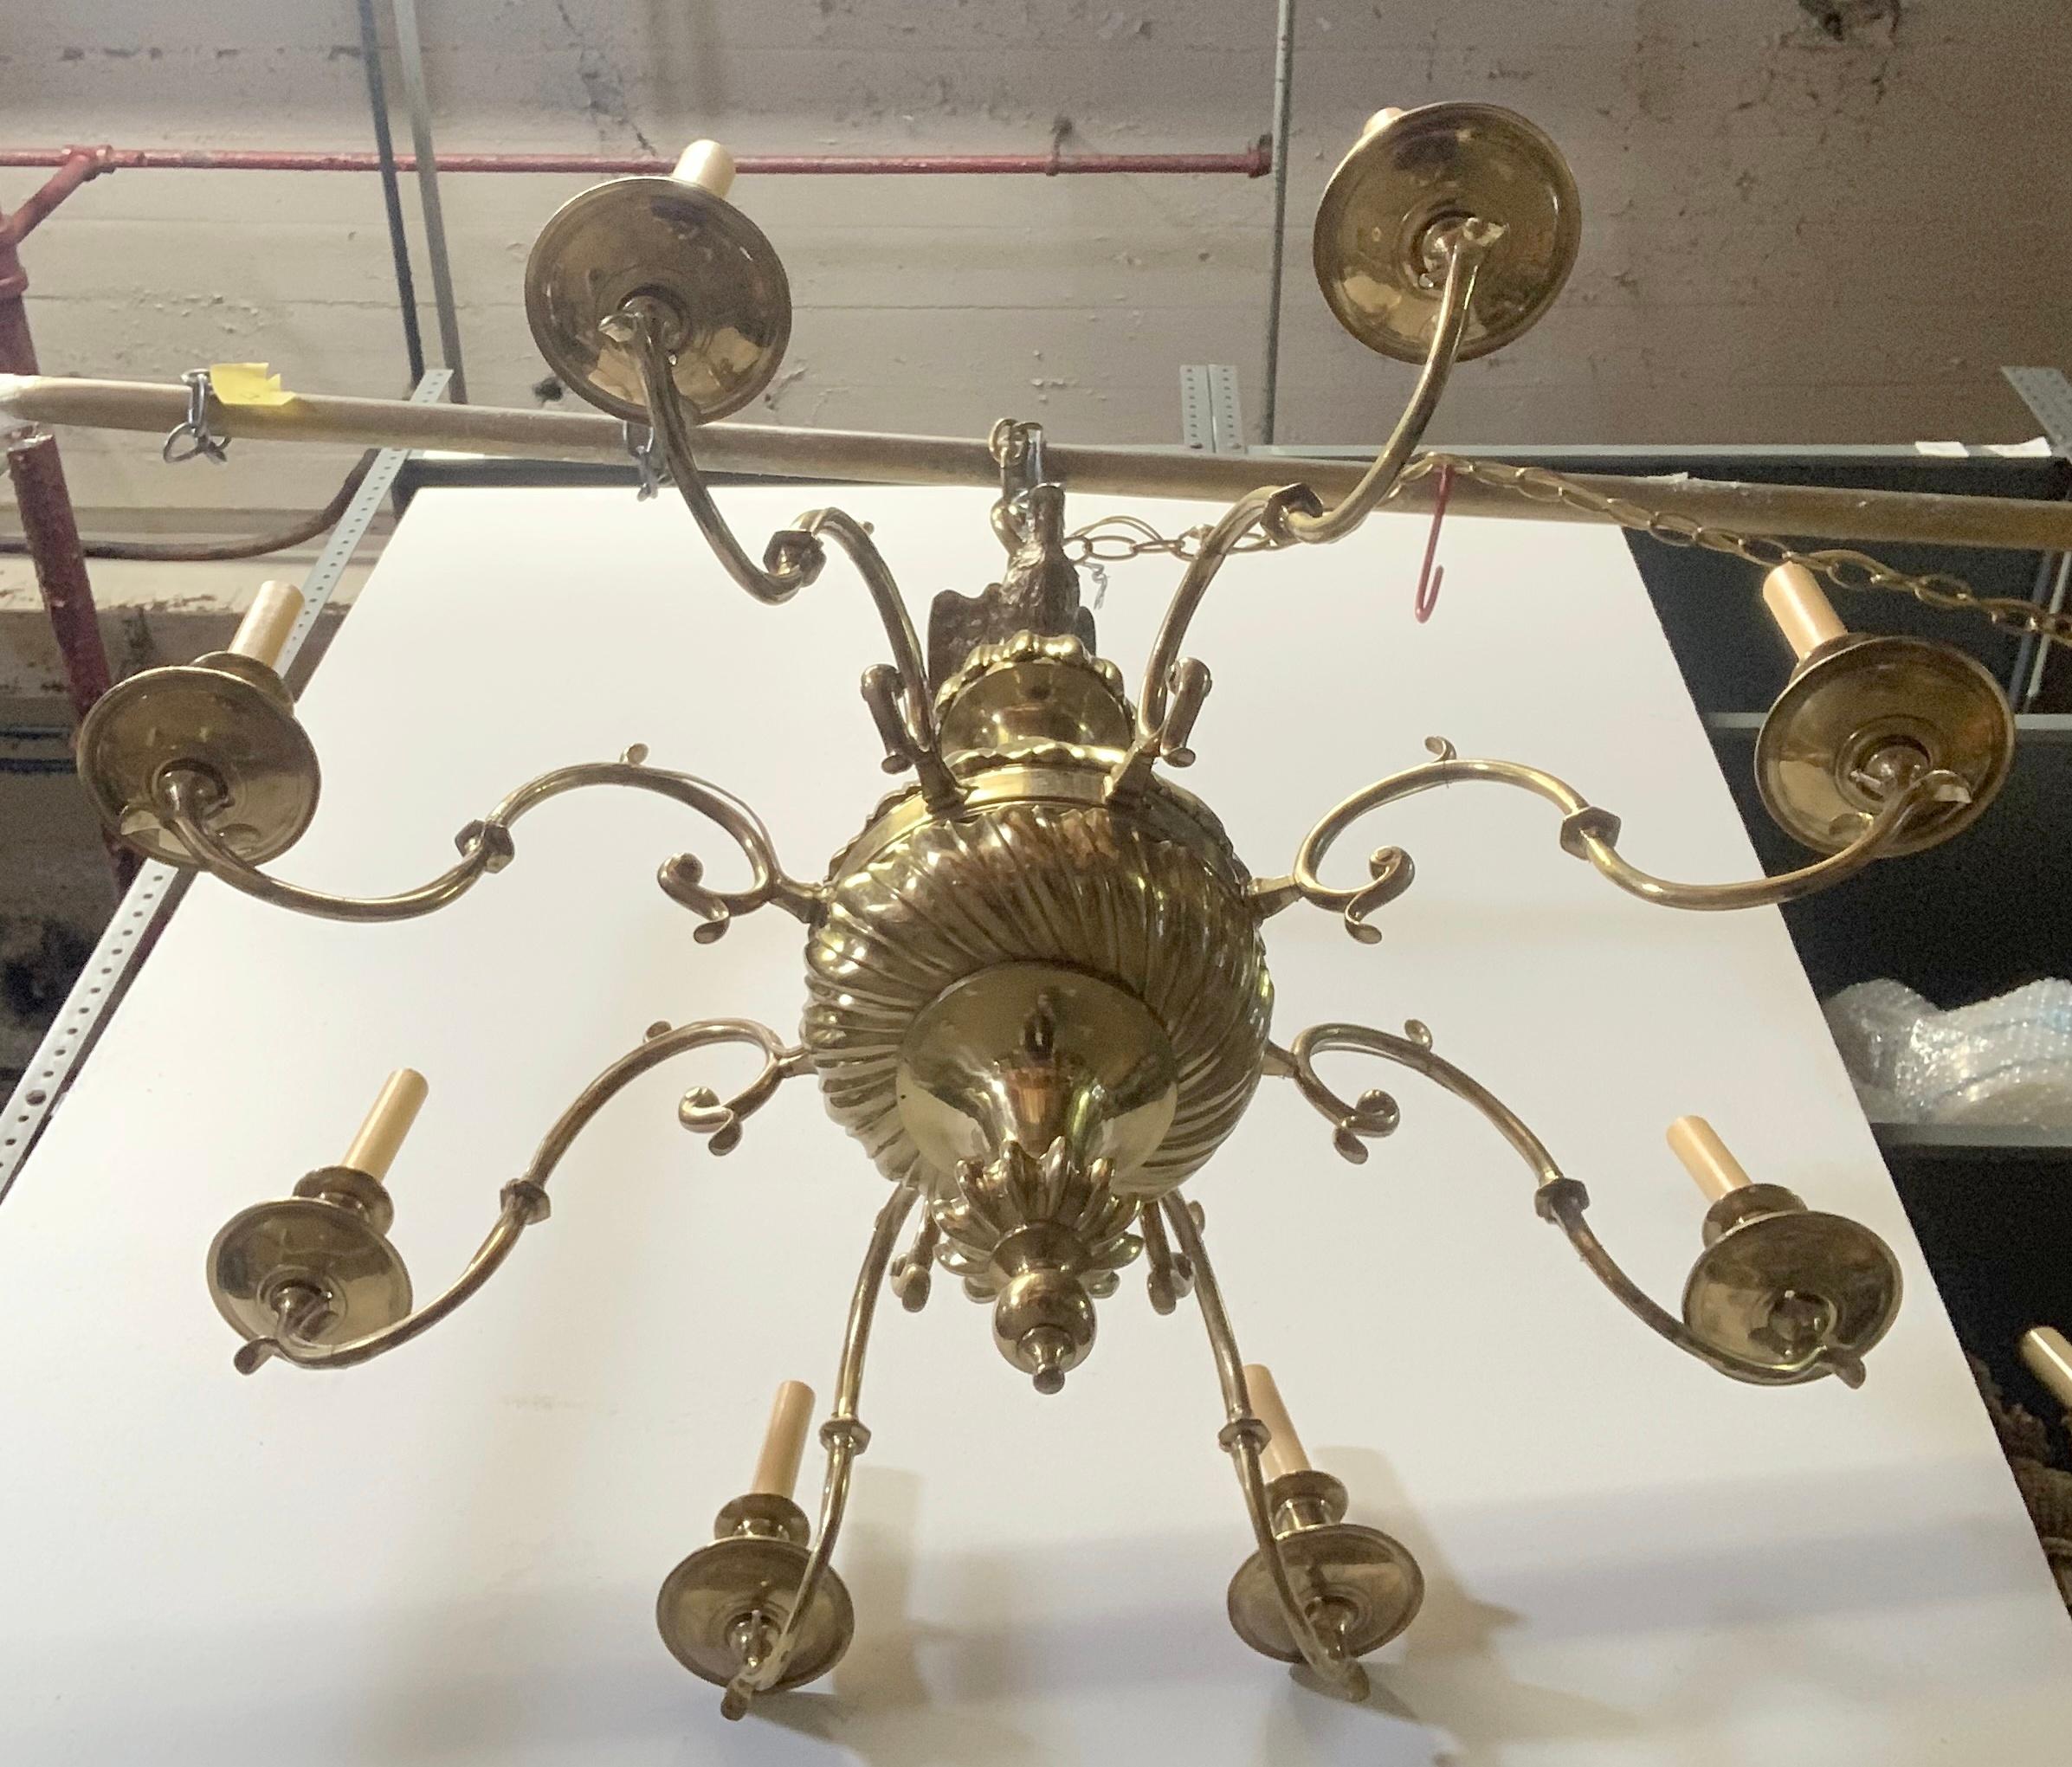 Early 1900s Brass 8-Arm Chandelier from NYC Stock Exchange w/ Eagle Finial 8